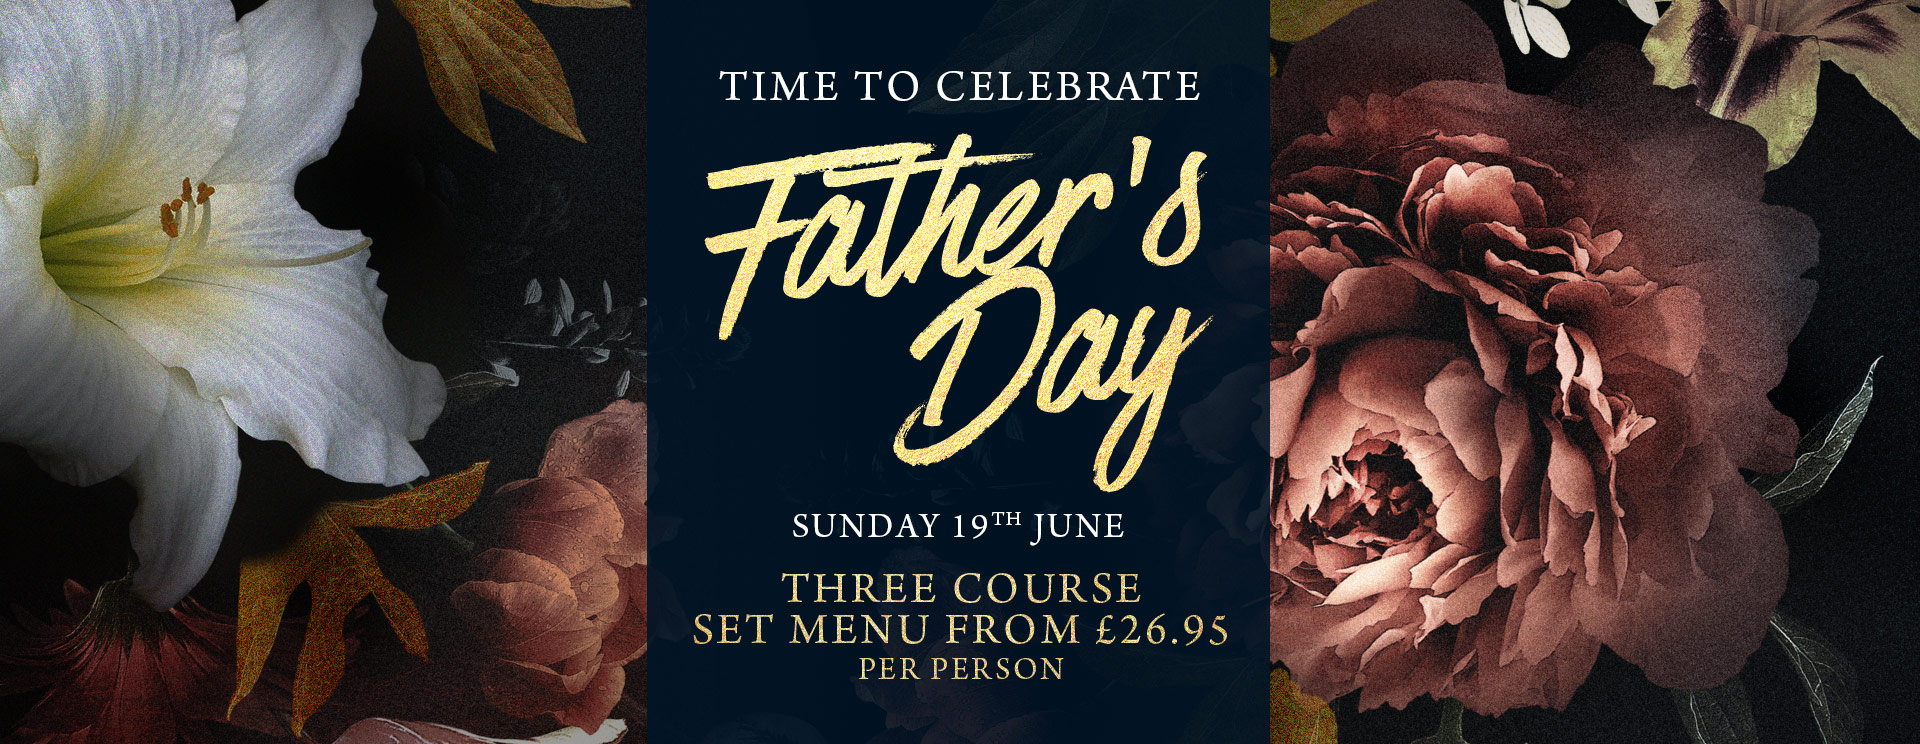 Fathers Day at The George & Dragon